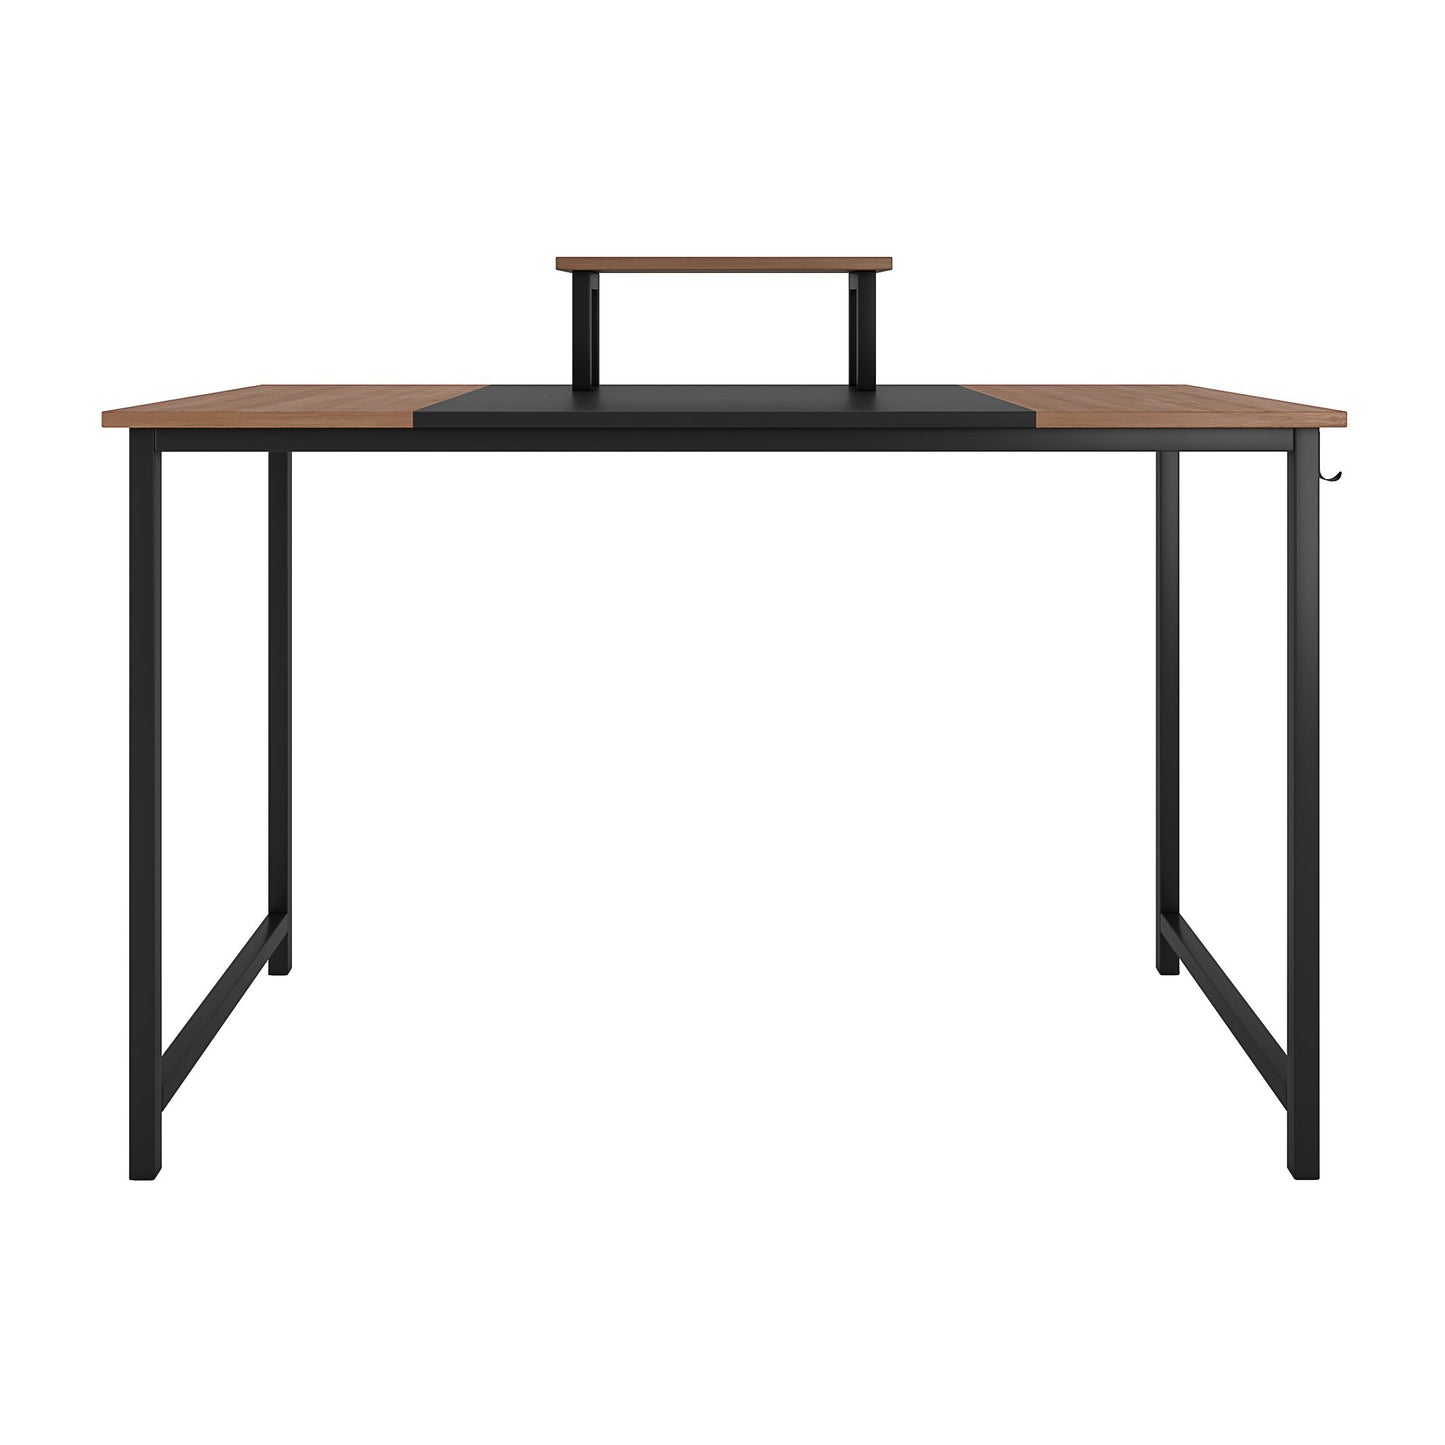 Nancy's Georgetown Desk - Computer table - Office table - Monitor stand - Mouse pad - Brown - Black - Engineered Wood - Steel - 120 x 60 x 75 cm